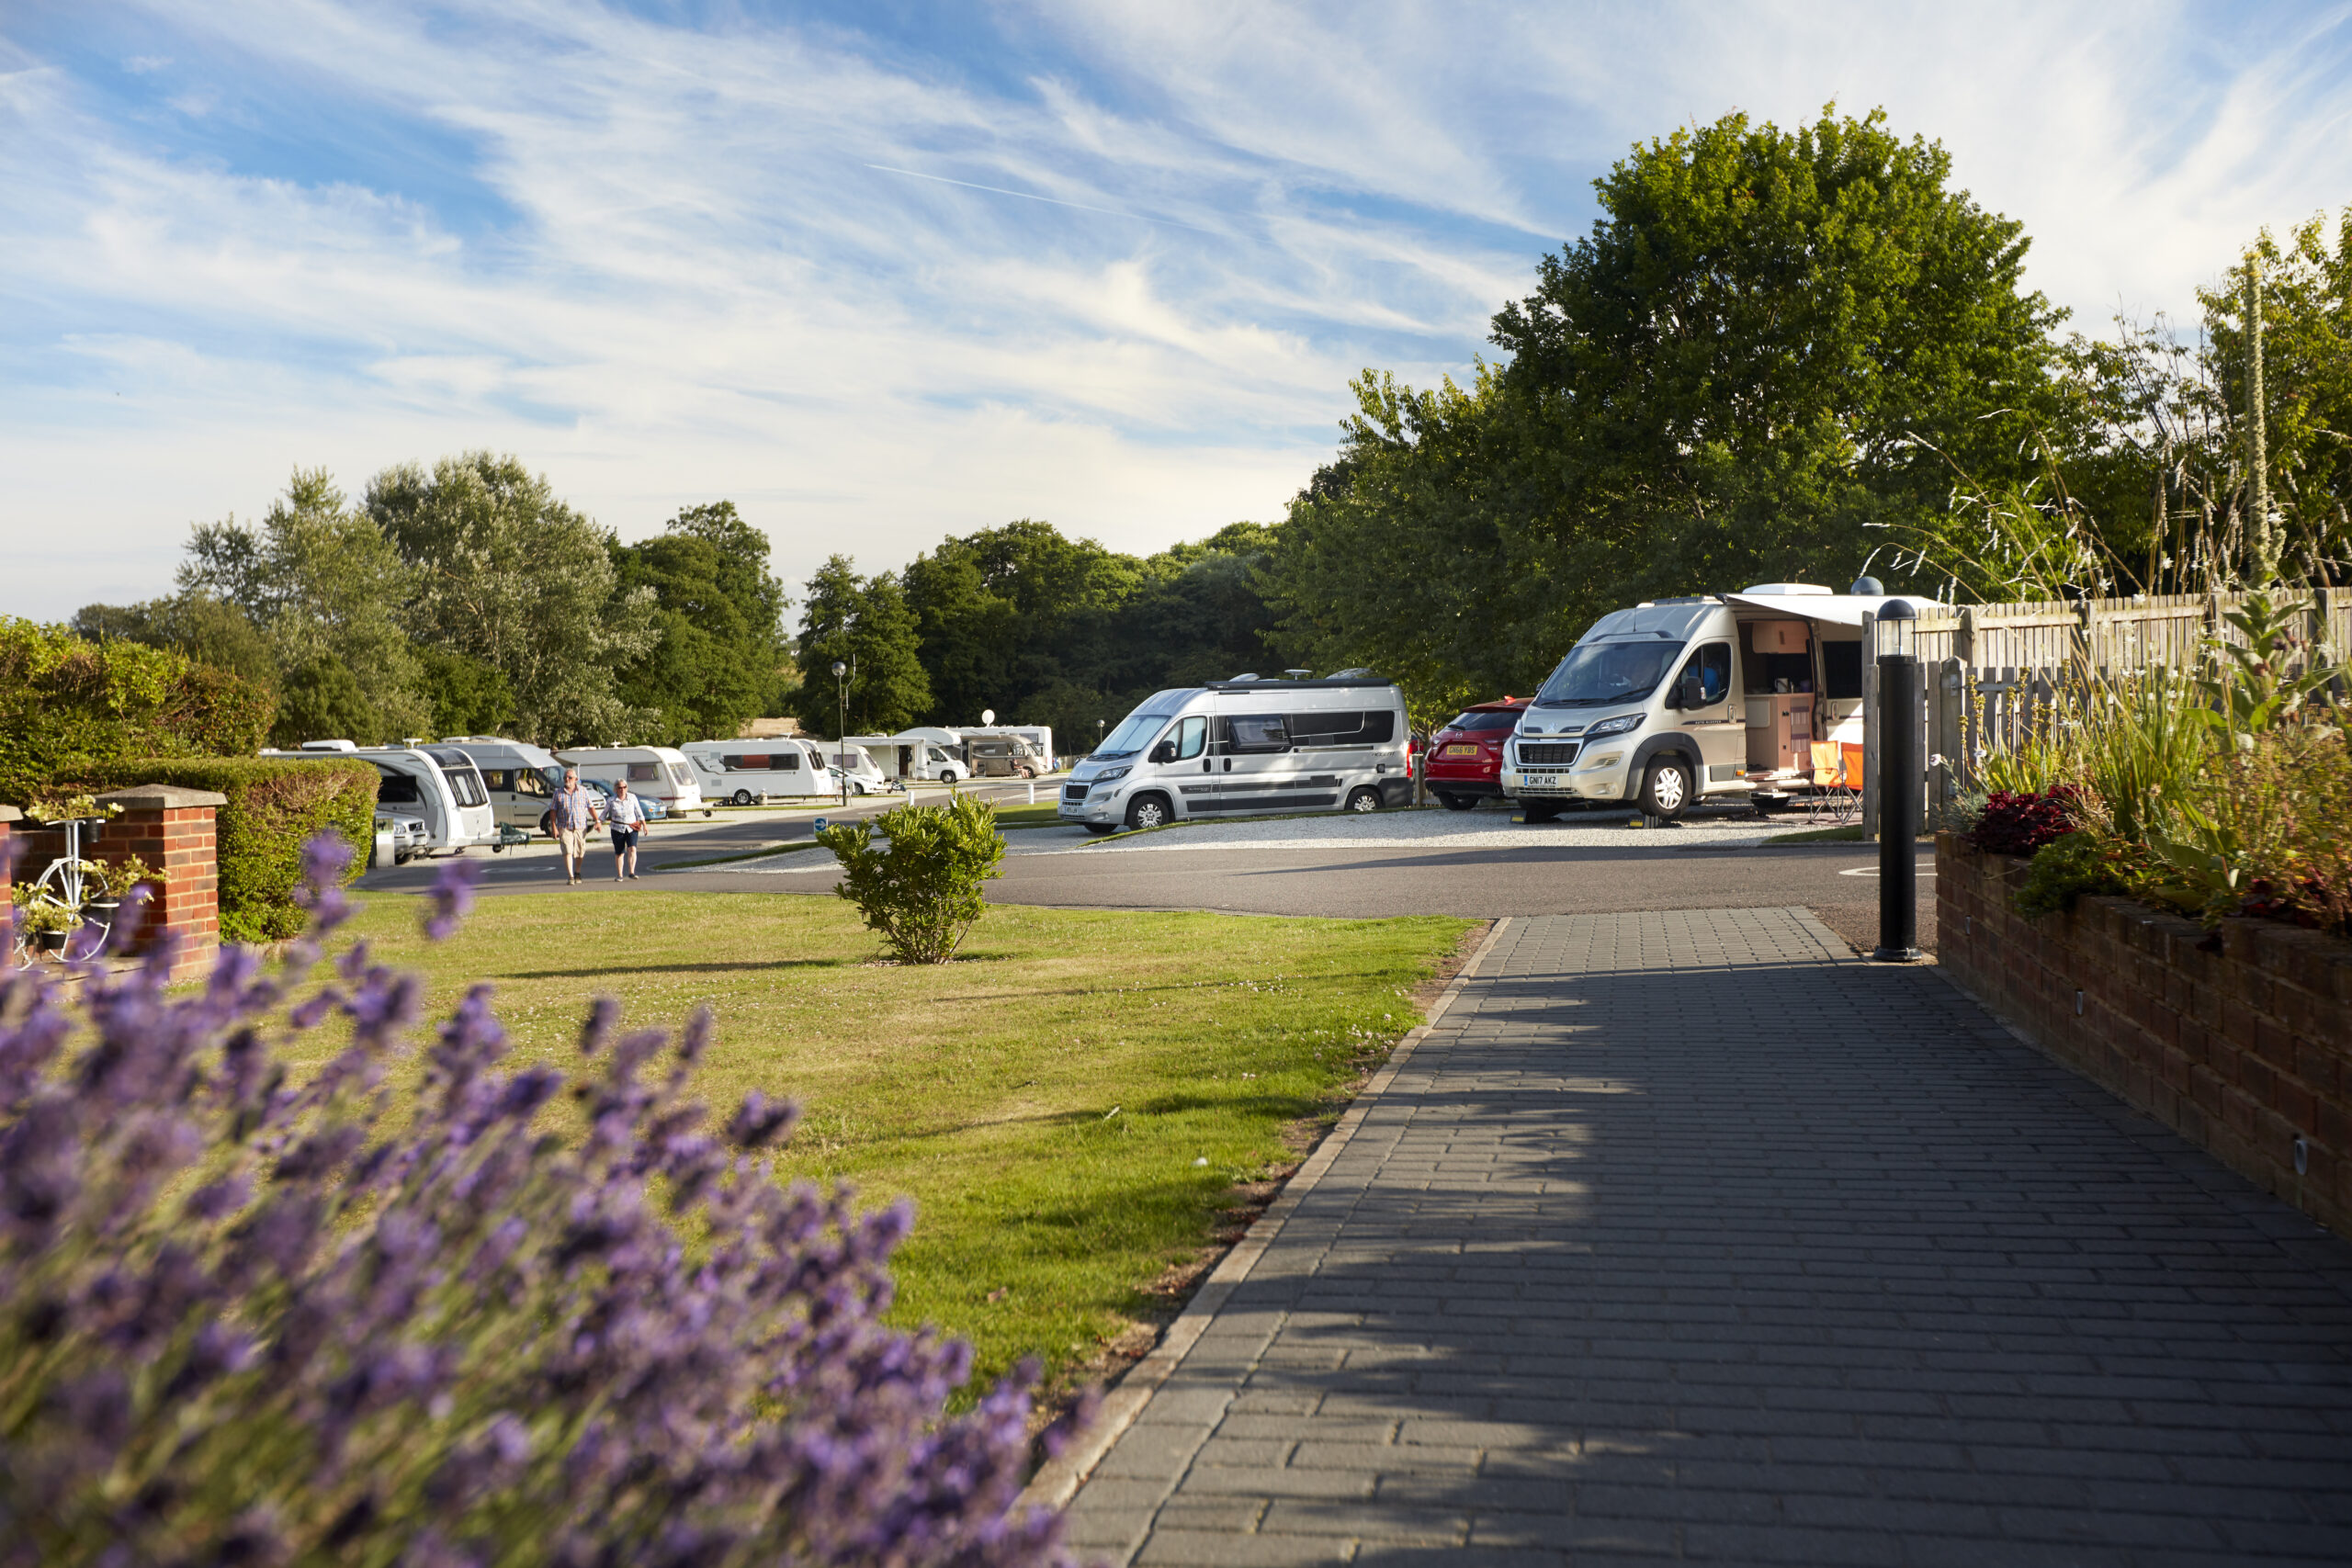 Home Page - 3rd image - Caption - Bearsted Club Campsite